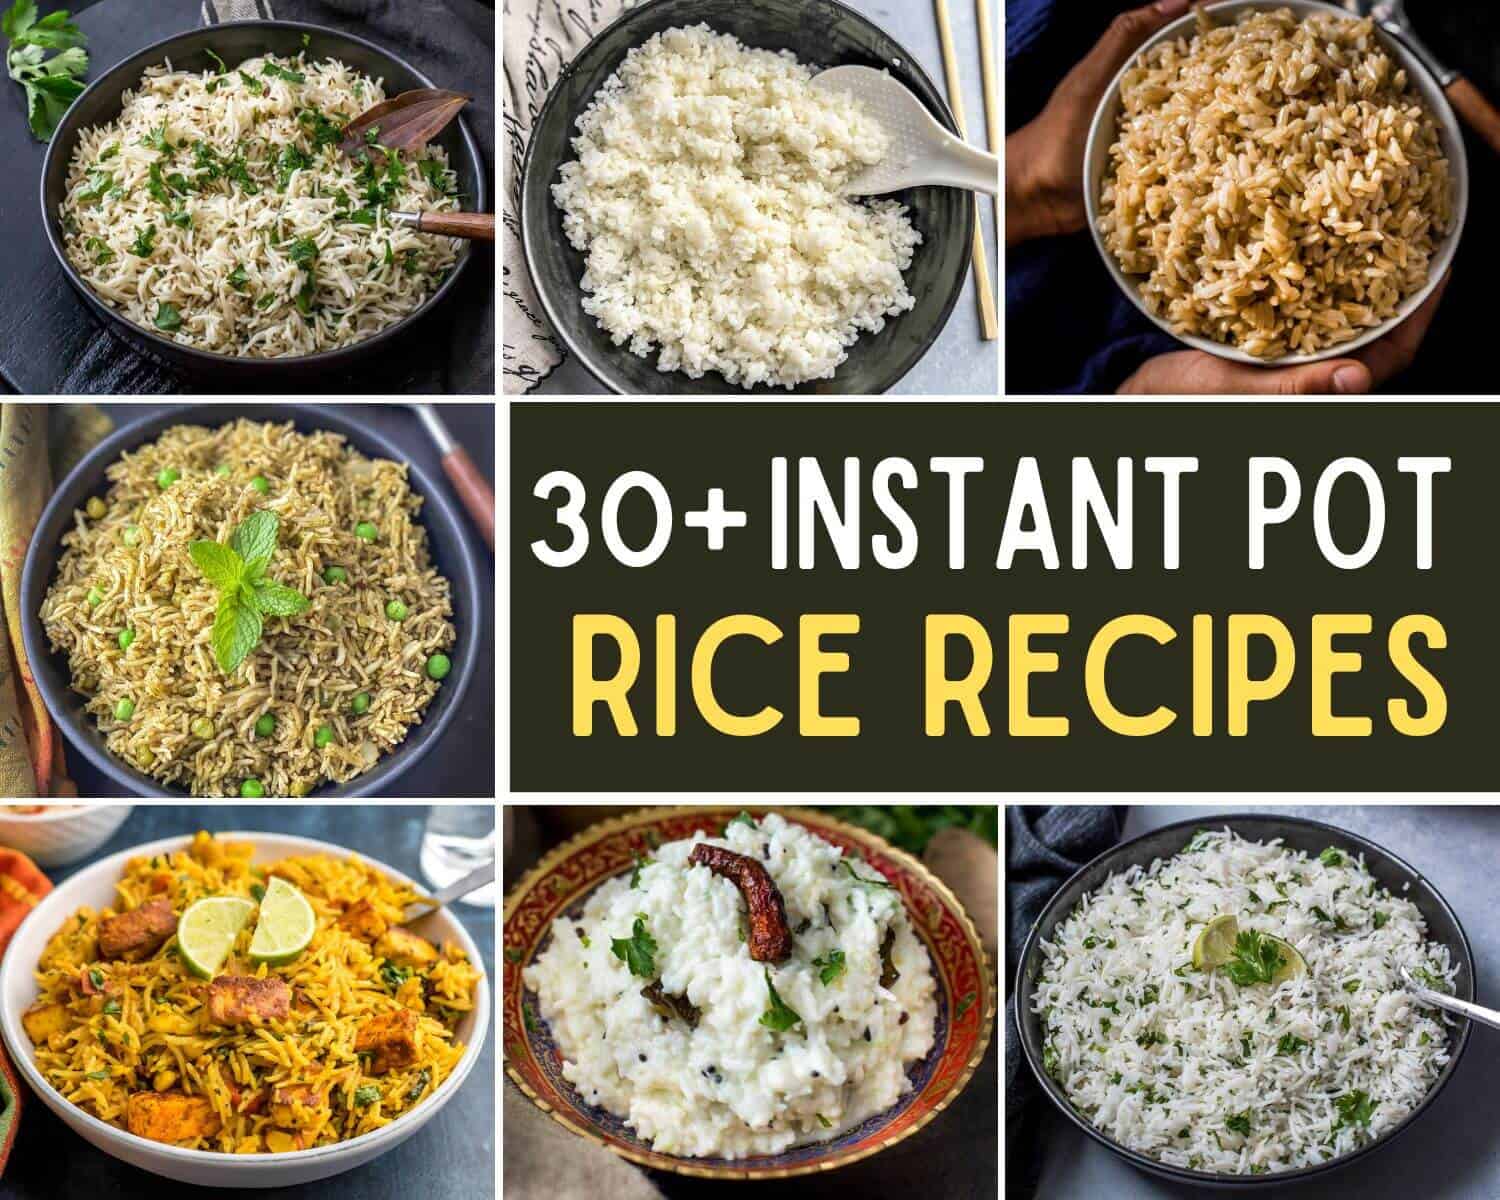 A collage of 7 images with a caption that says 30+ Easy Instant Pot Rice Recipes